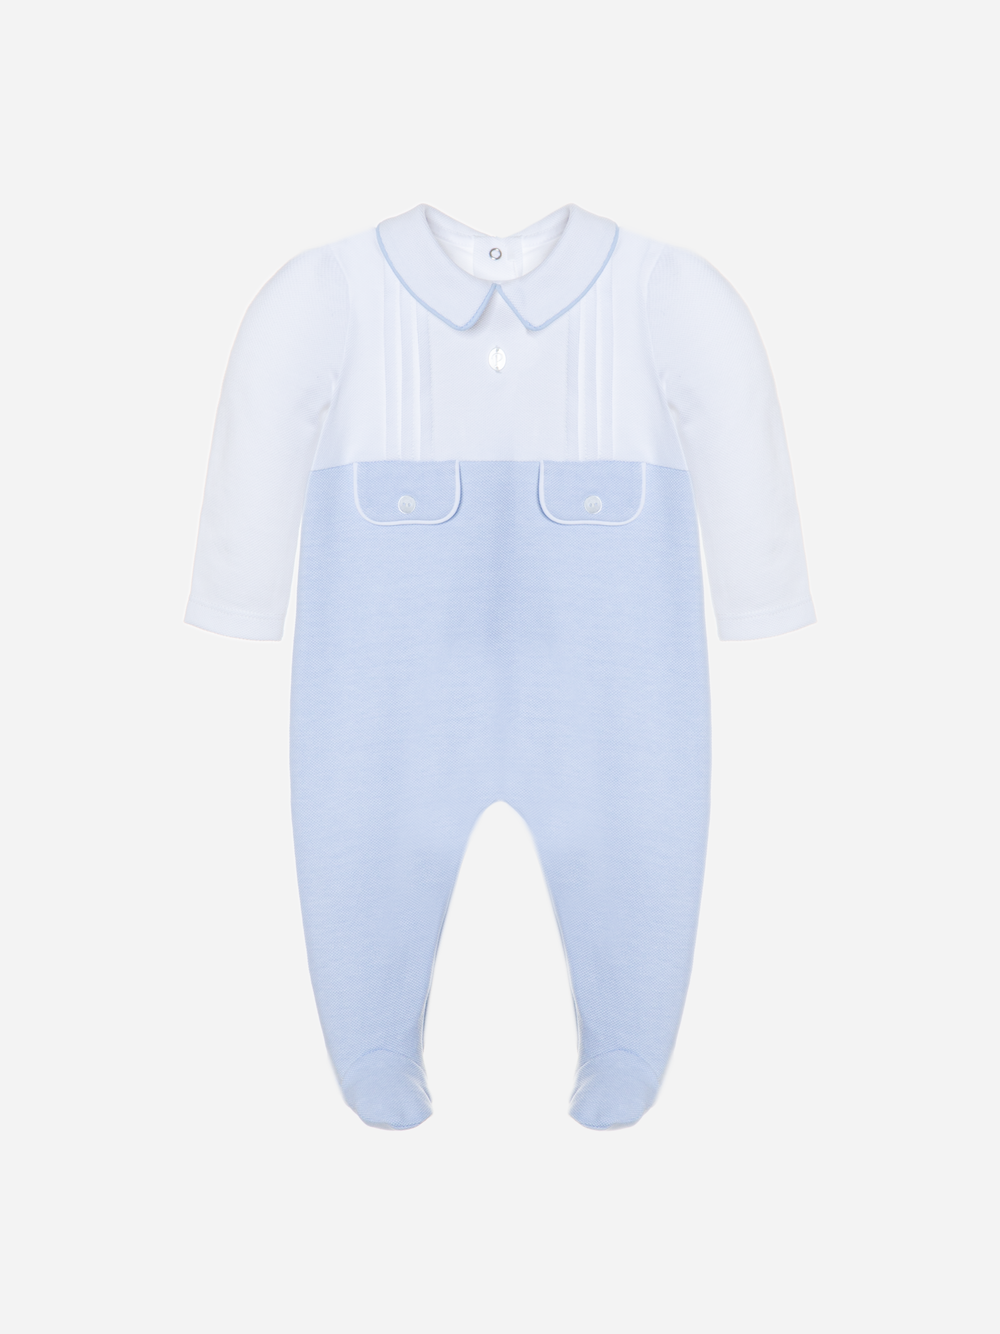 White and blue jersey babygrow